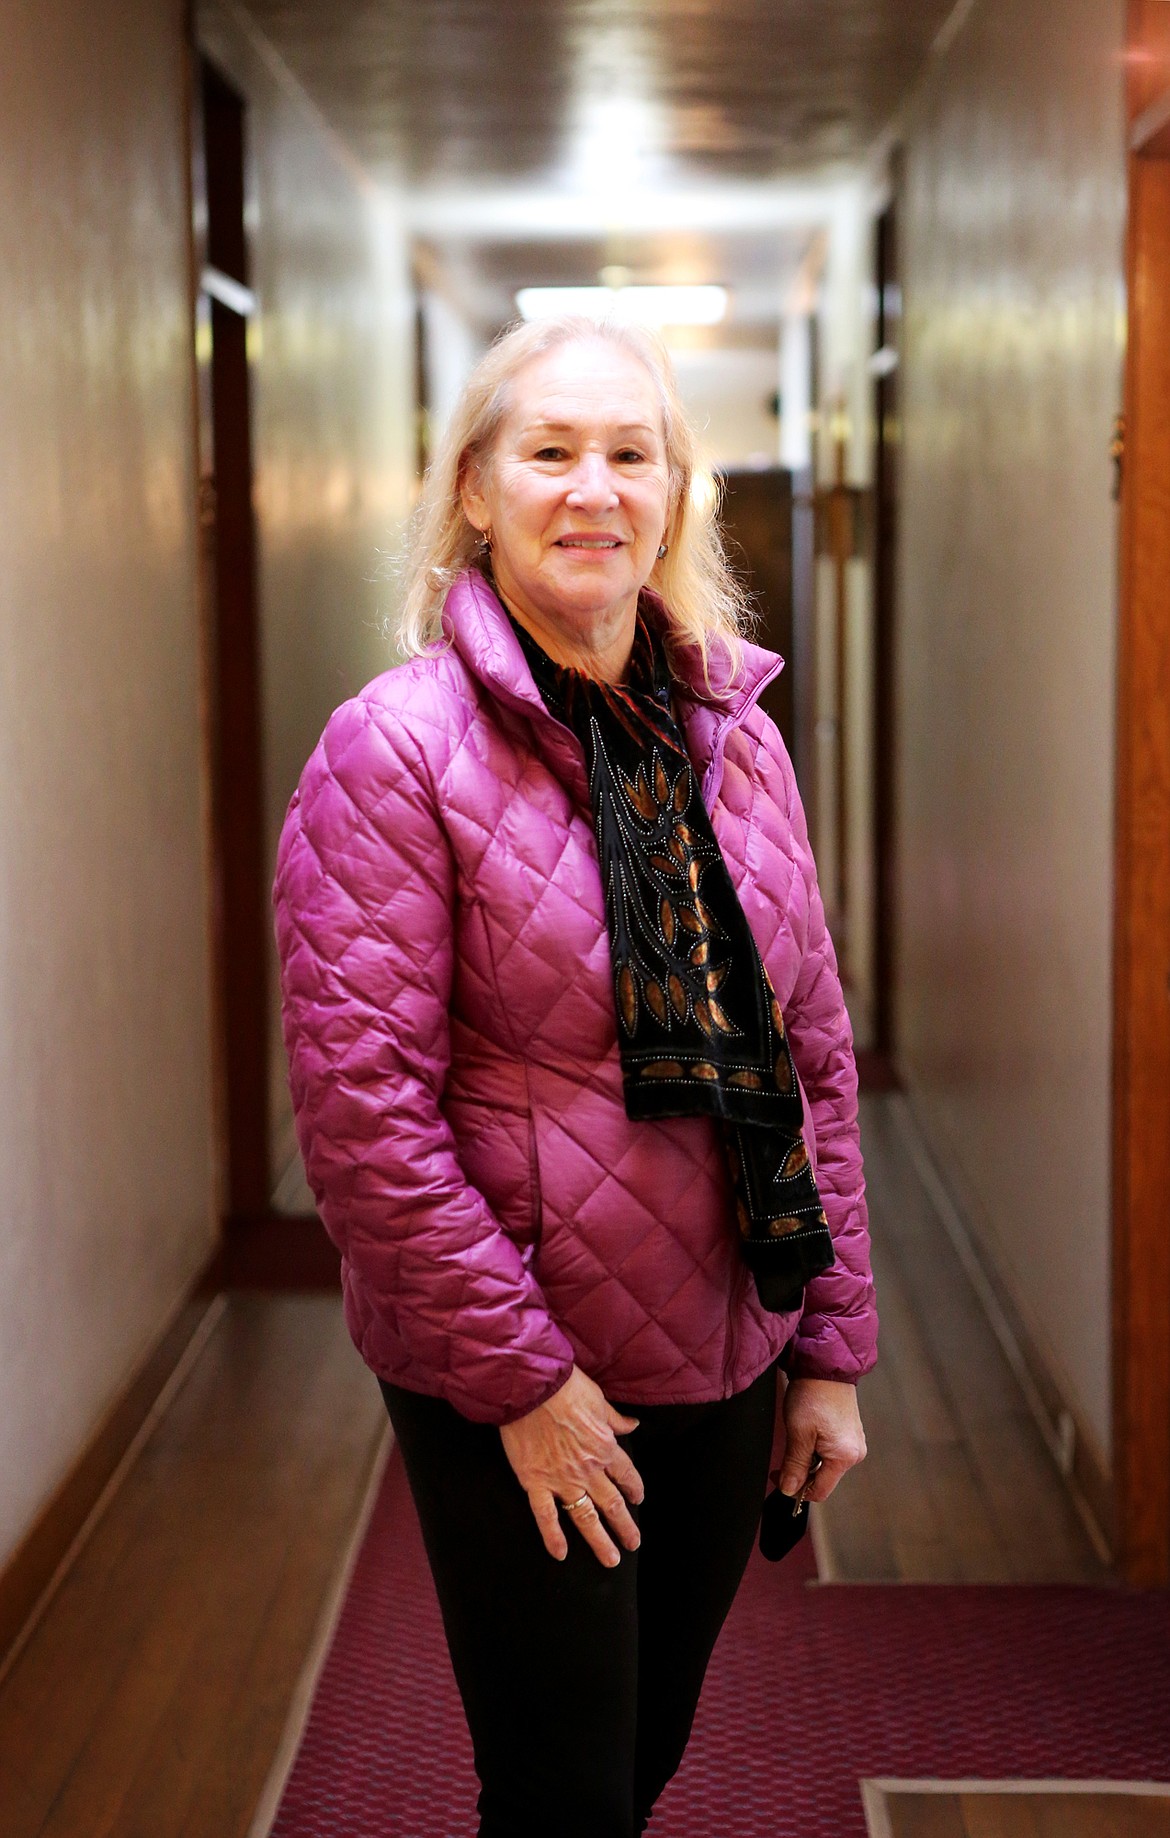 Leslee Smith, who owns the Symes Hot Springs Hotel with her husband Dan, poses for a portrait in an upstairs hallway. The Smiths purchased the hotel in 1996. (Mackenzie Reiss/Daily Inter Lake)